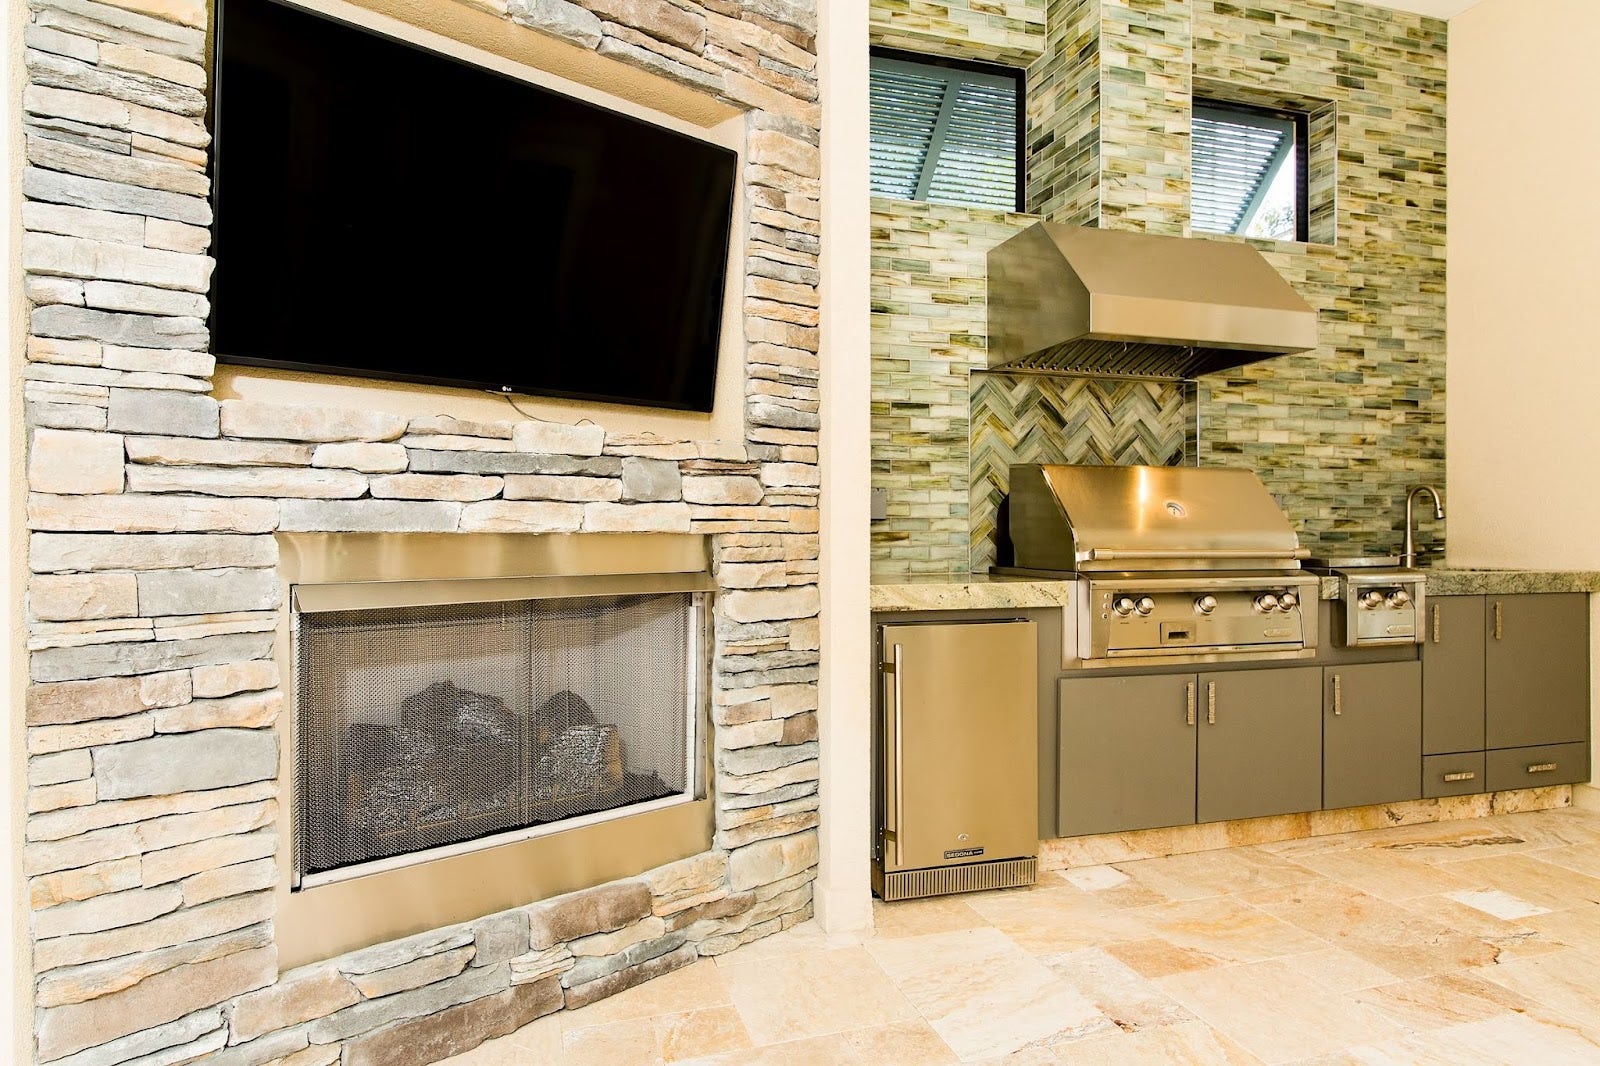 Elegant stone patio featuring a Proline range hood above a high-end grill, complete with sleek storage solutions and a mounted TV for entertainment - prolinerangehoods.com.